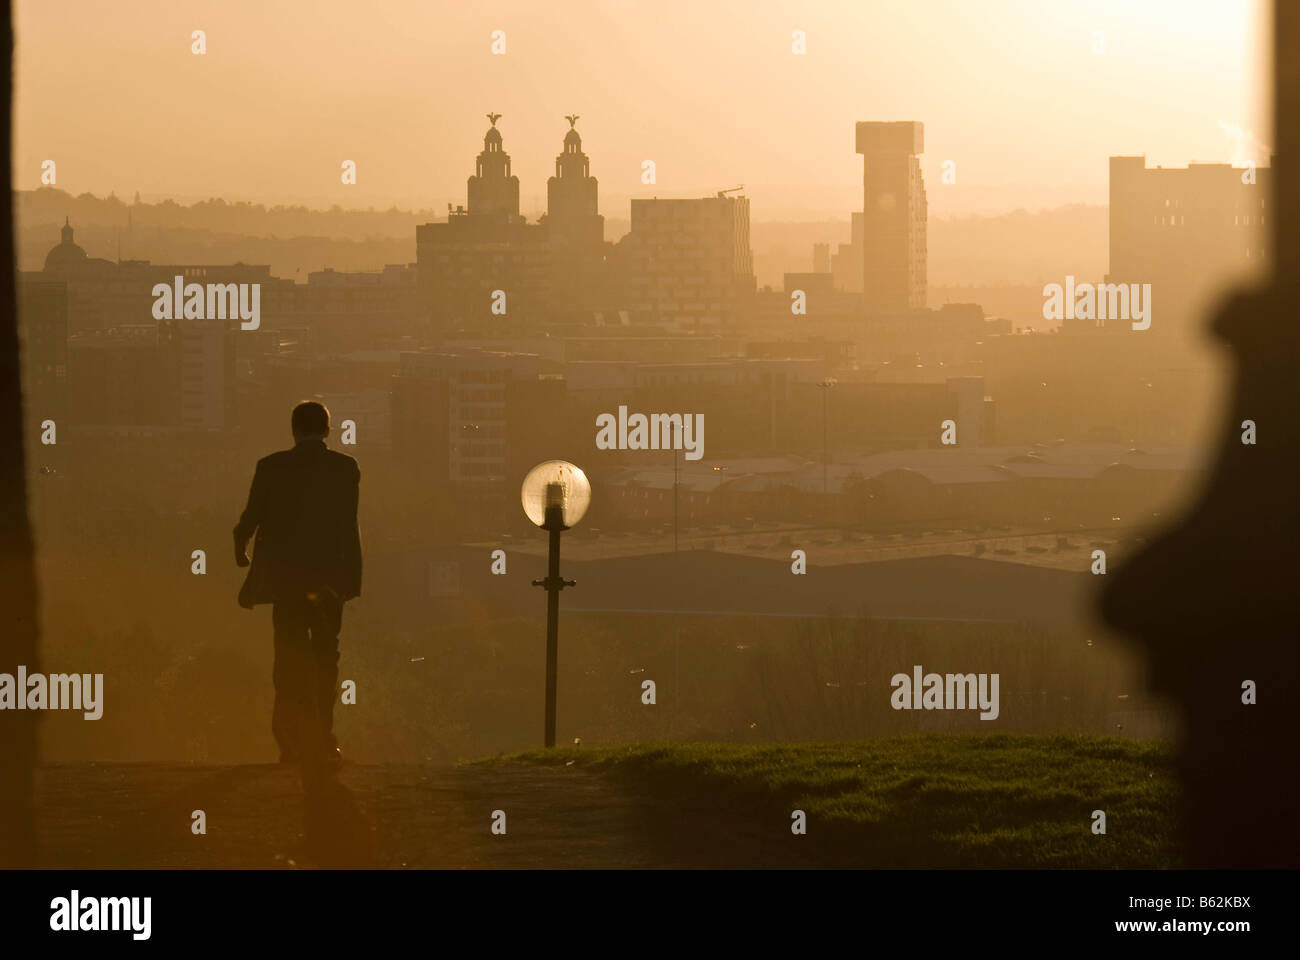 The city skyline Liverpool in the early evening autumn sunset seen from Everton Park as a schoolboy wends his way home. Stock Photo